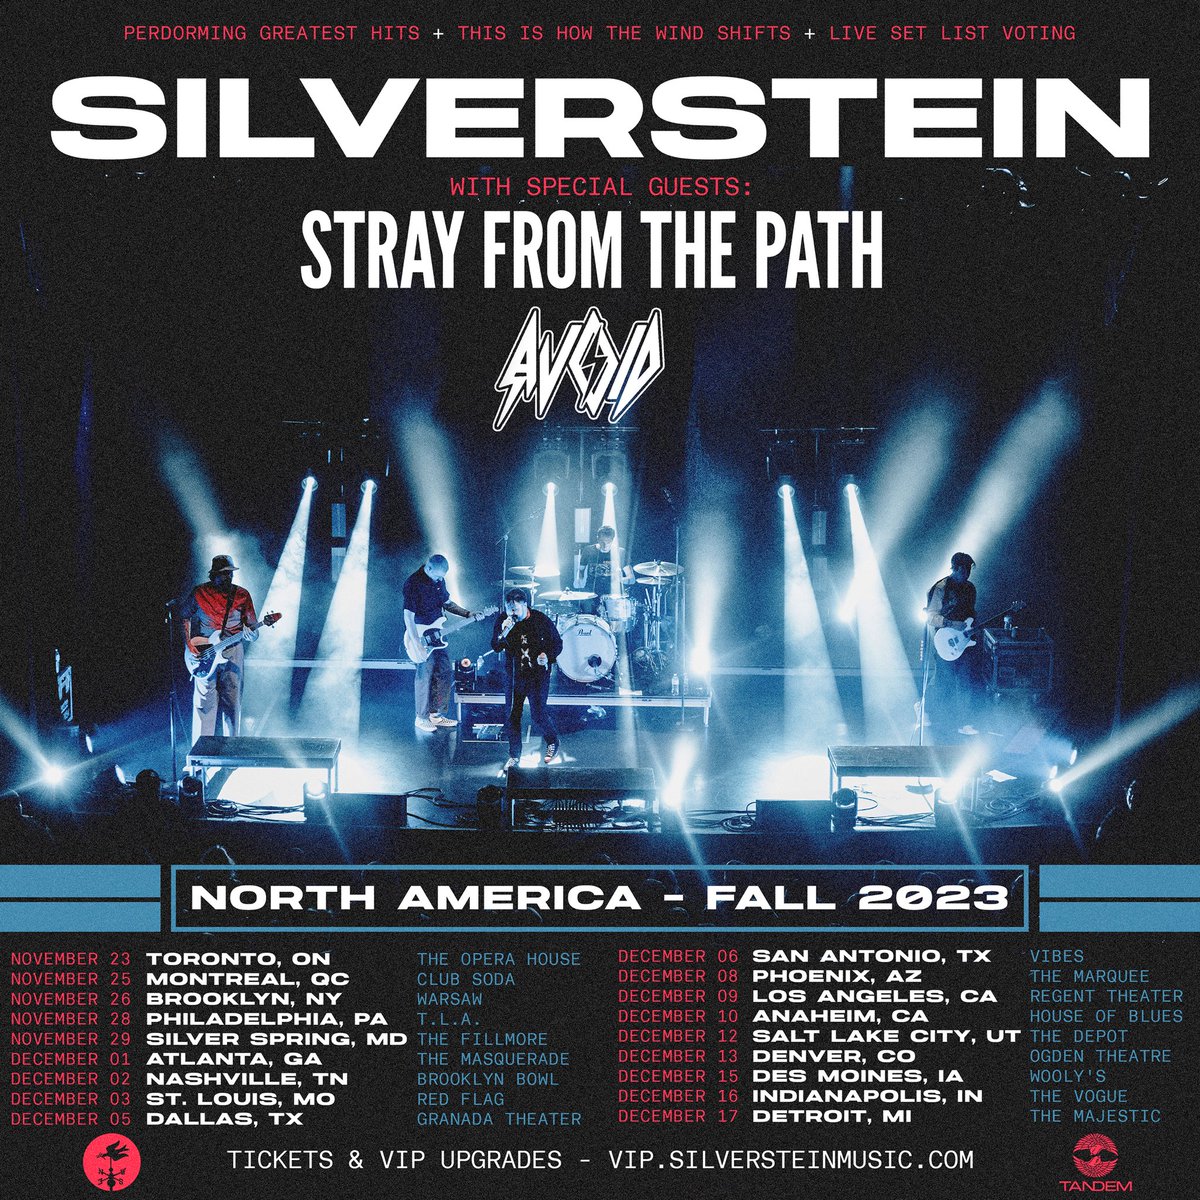 🇨🇦🇺🇸TOUR: Nov 23-Dec 17 with: @strayfromdapath & @AVOIDKICKSASS VERY special show including all your favourite Hits / This is How the Wind Shifts (full album - first and only time) / Live Set List Voting - allowing fans to pick songs during the show! 🎫 VIP.SilversteinMusic.com